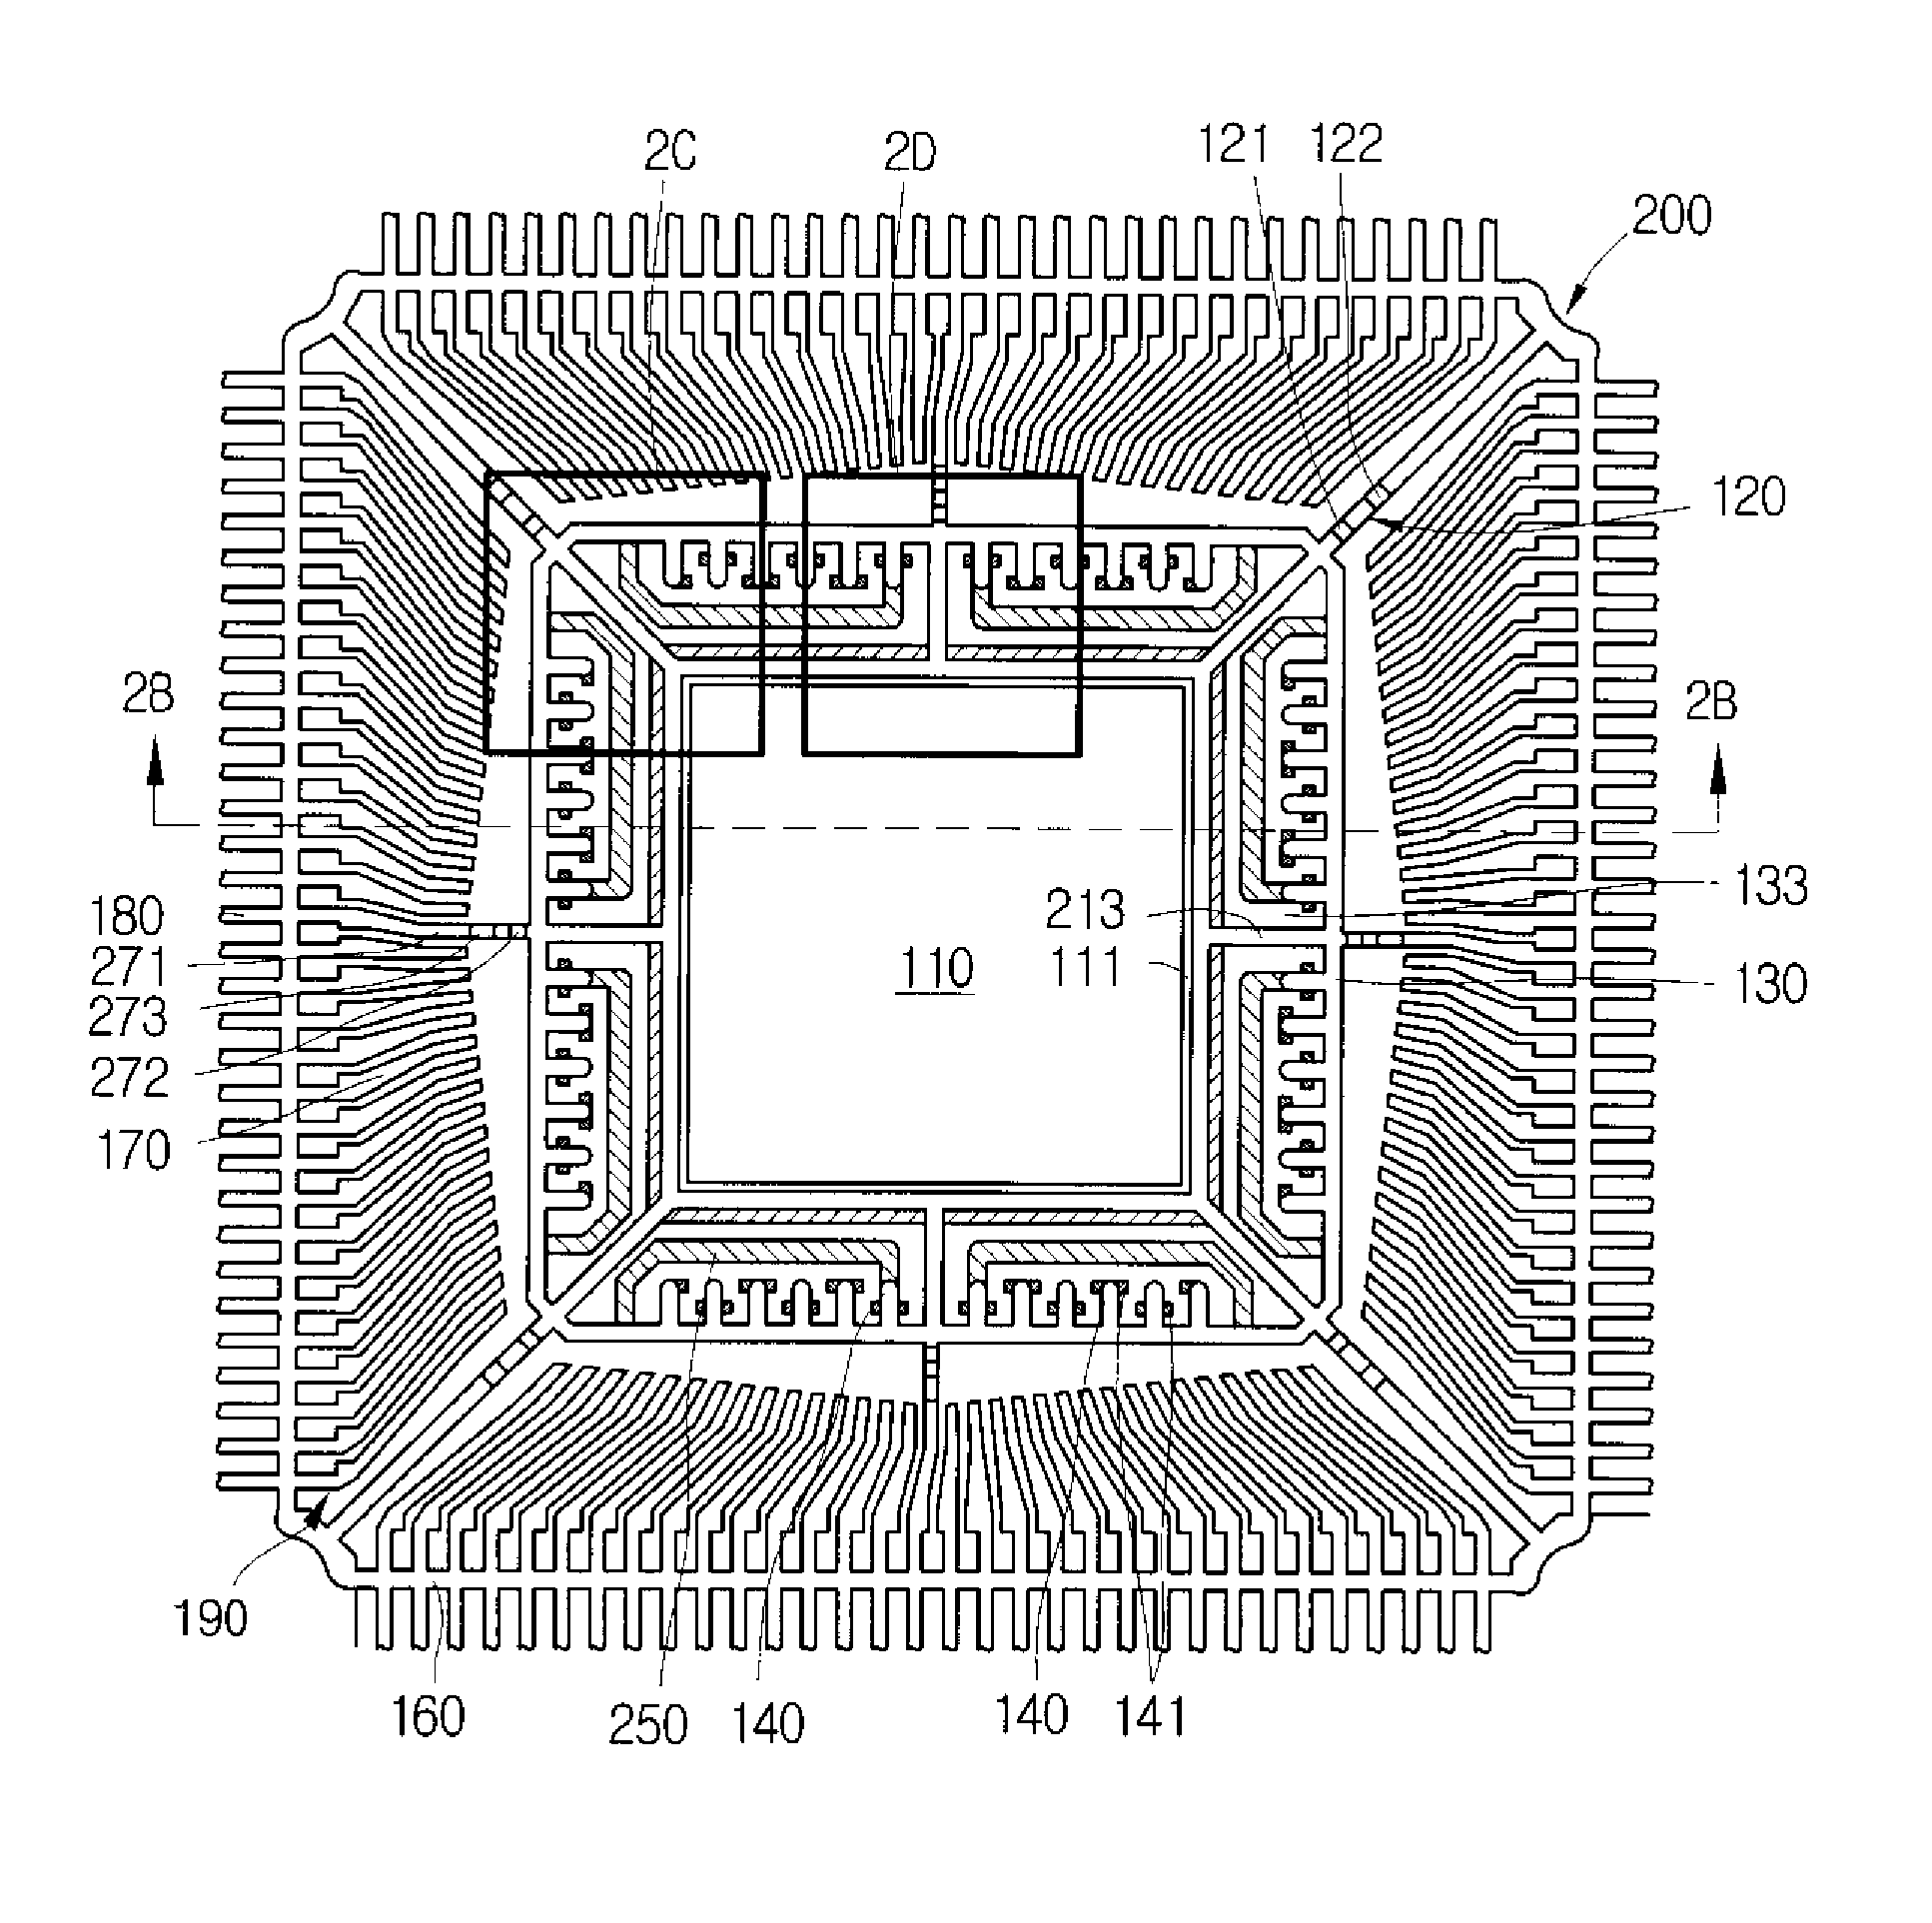 Semiconductor device including leadframe having power bars and increased I/O